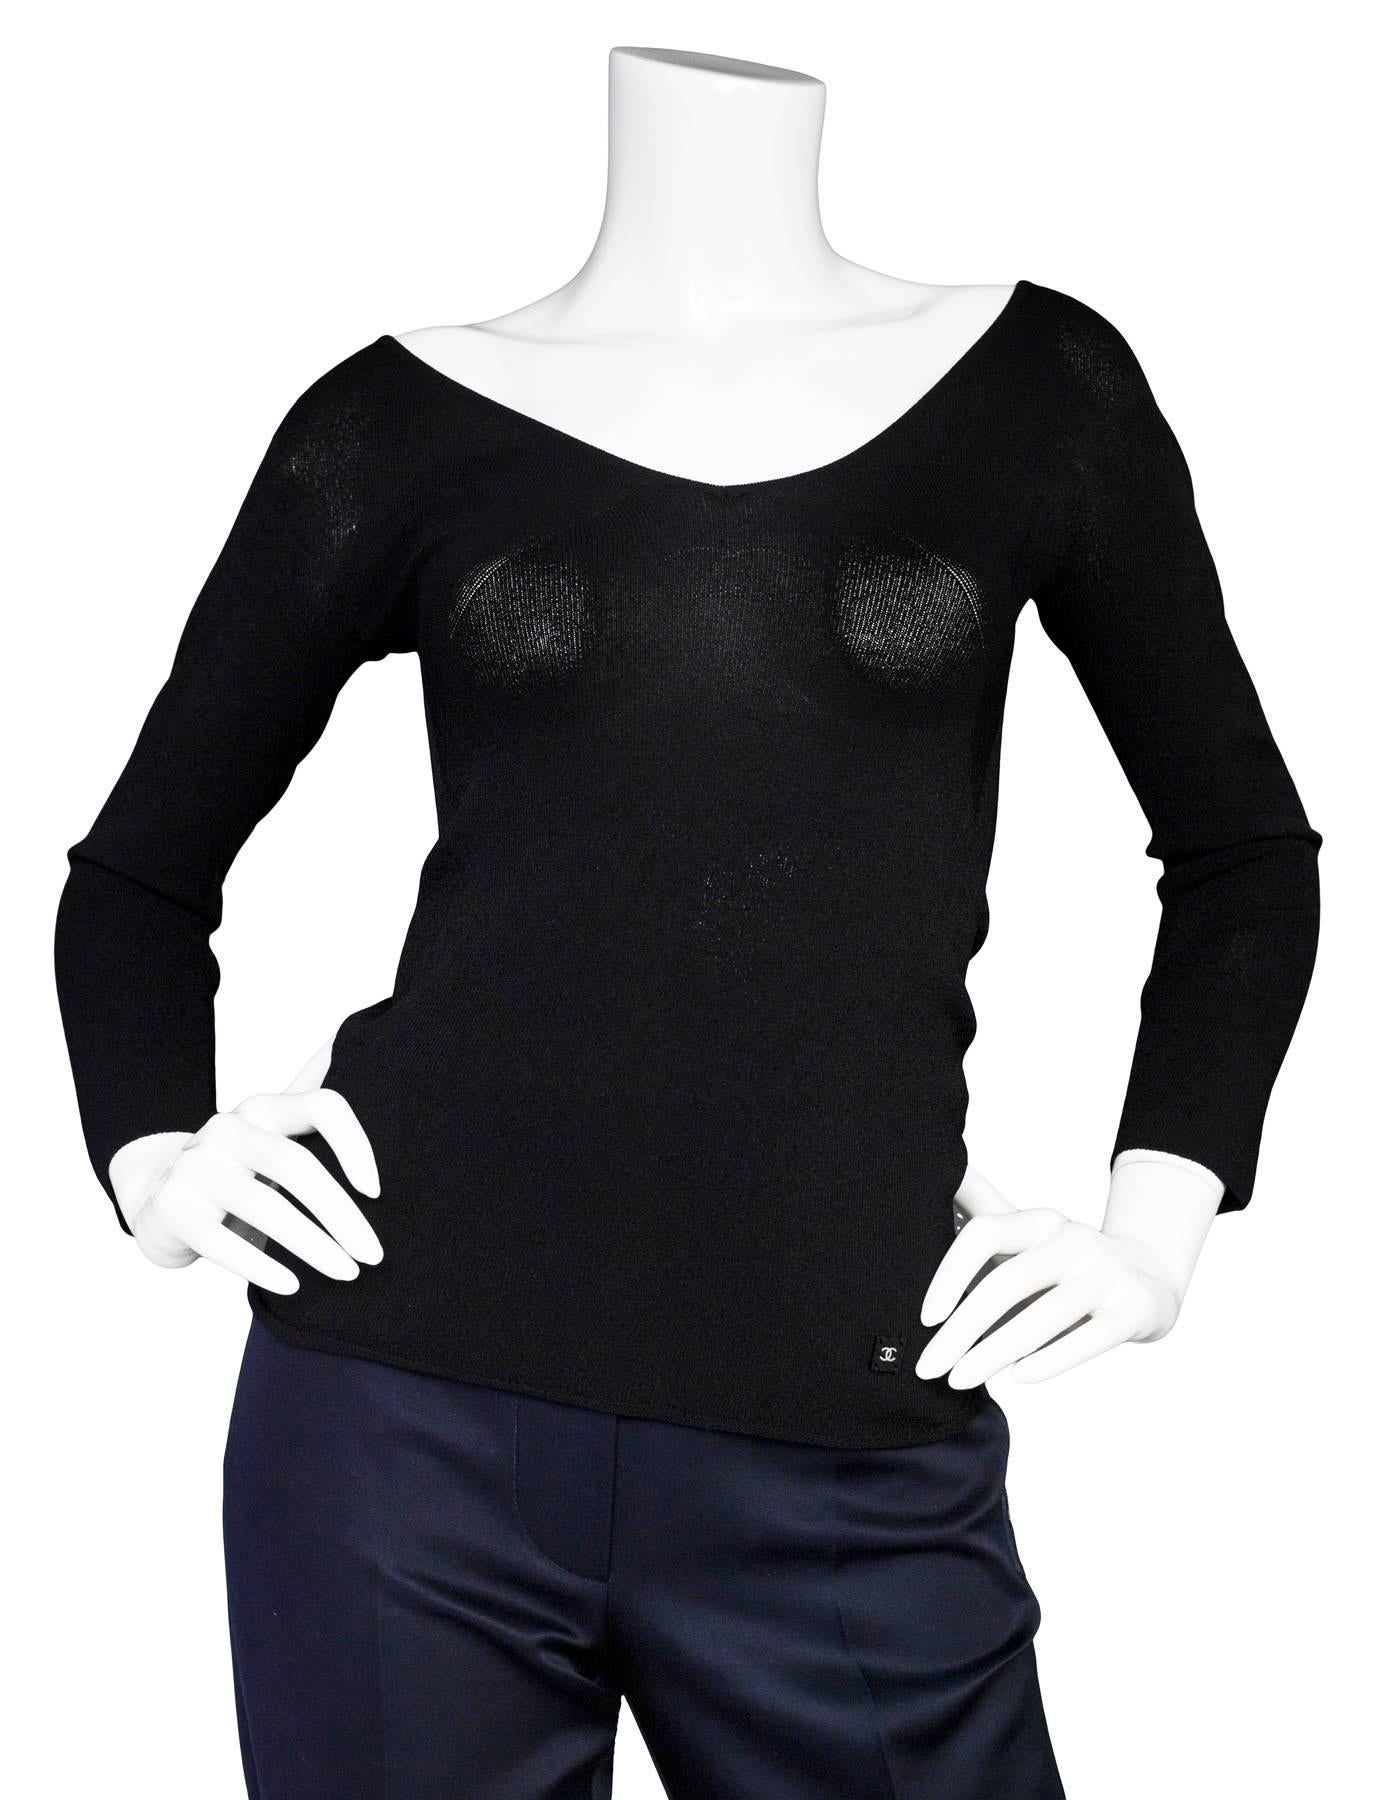 Chanel Black Top Sz FR38

Made In: Italy
Year of Production: 2002
Color: Black
Composition: 75% Rayon,25% polyester
Closure/Opening: Pull over 
Overall Condition: Excellent pre-owned condition, small pull at sleeve

Marked Size: FR38/ US 4, 6
Bust: